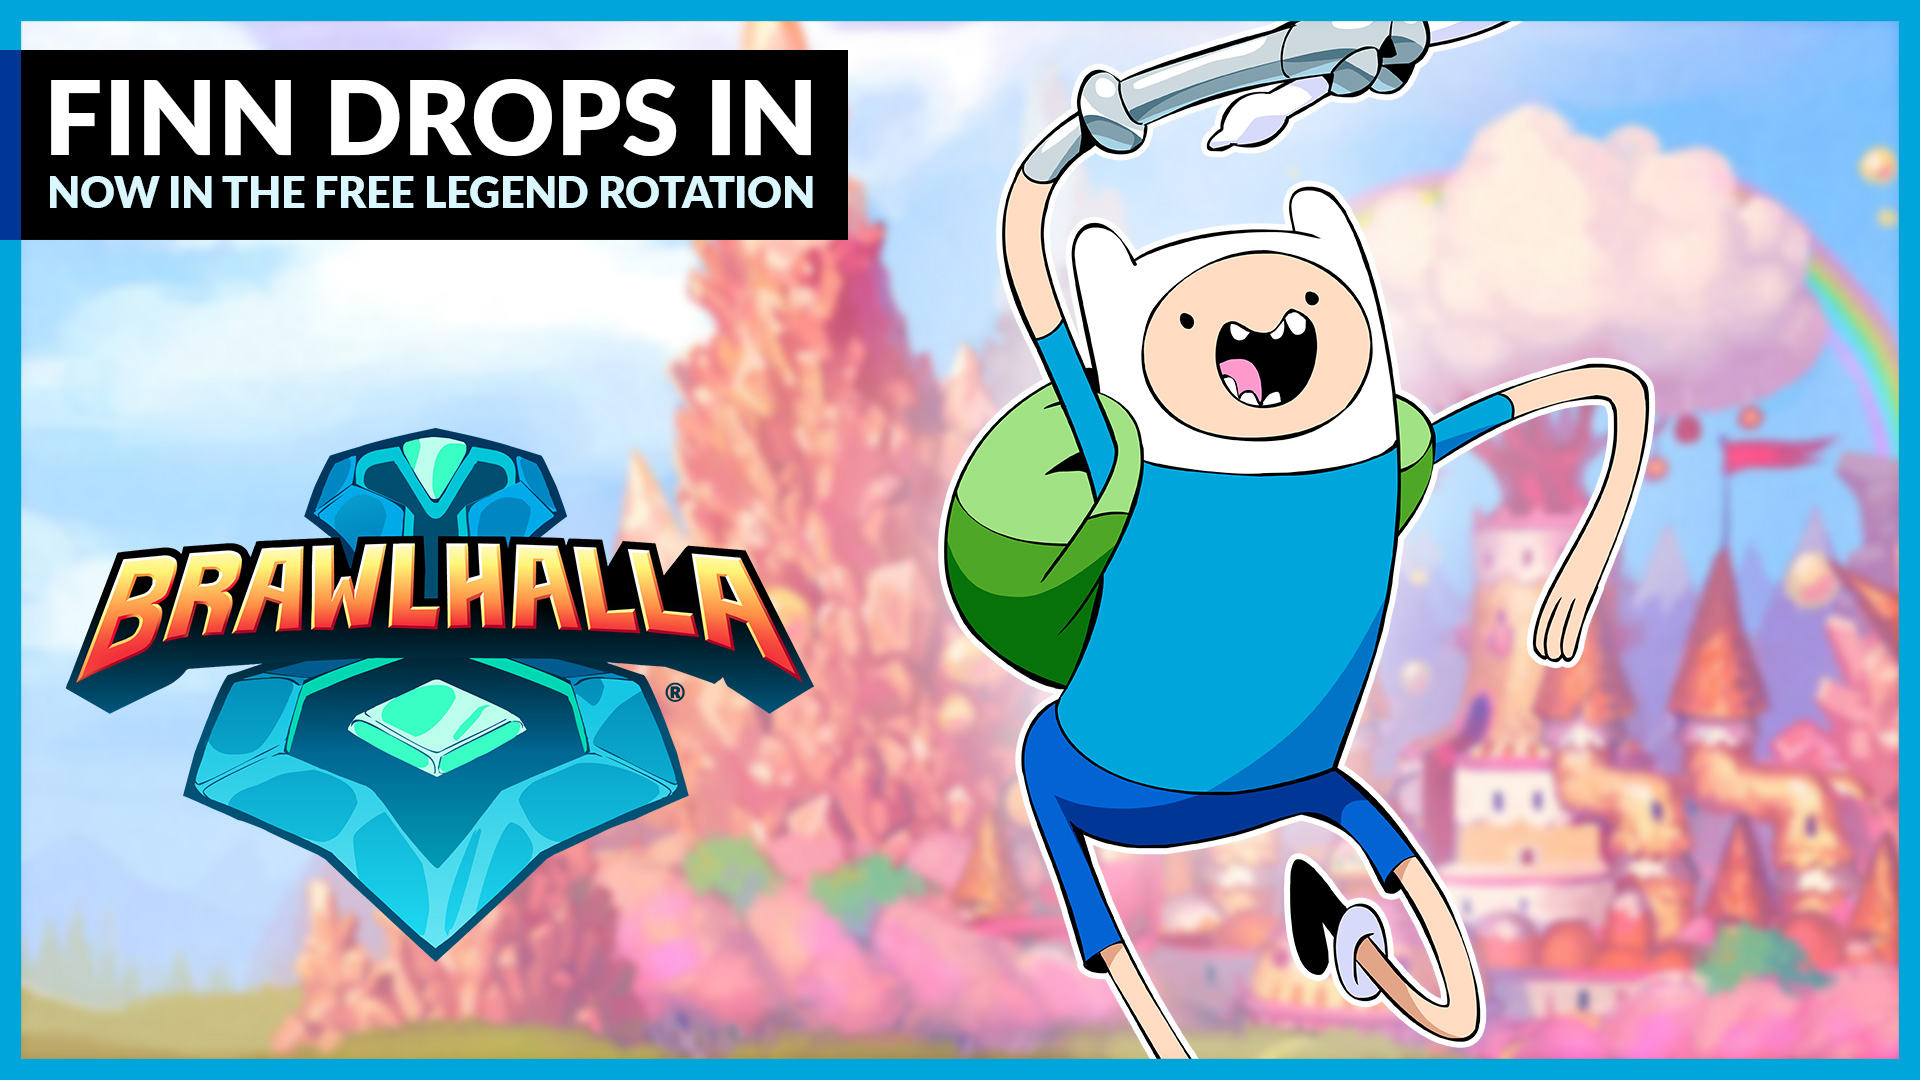 Finn from Adventure Time joins Free-to-Play Legend Rotation!